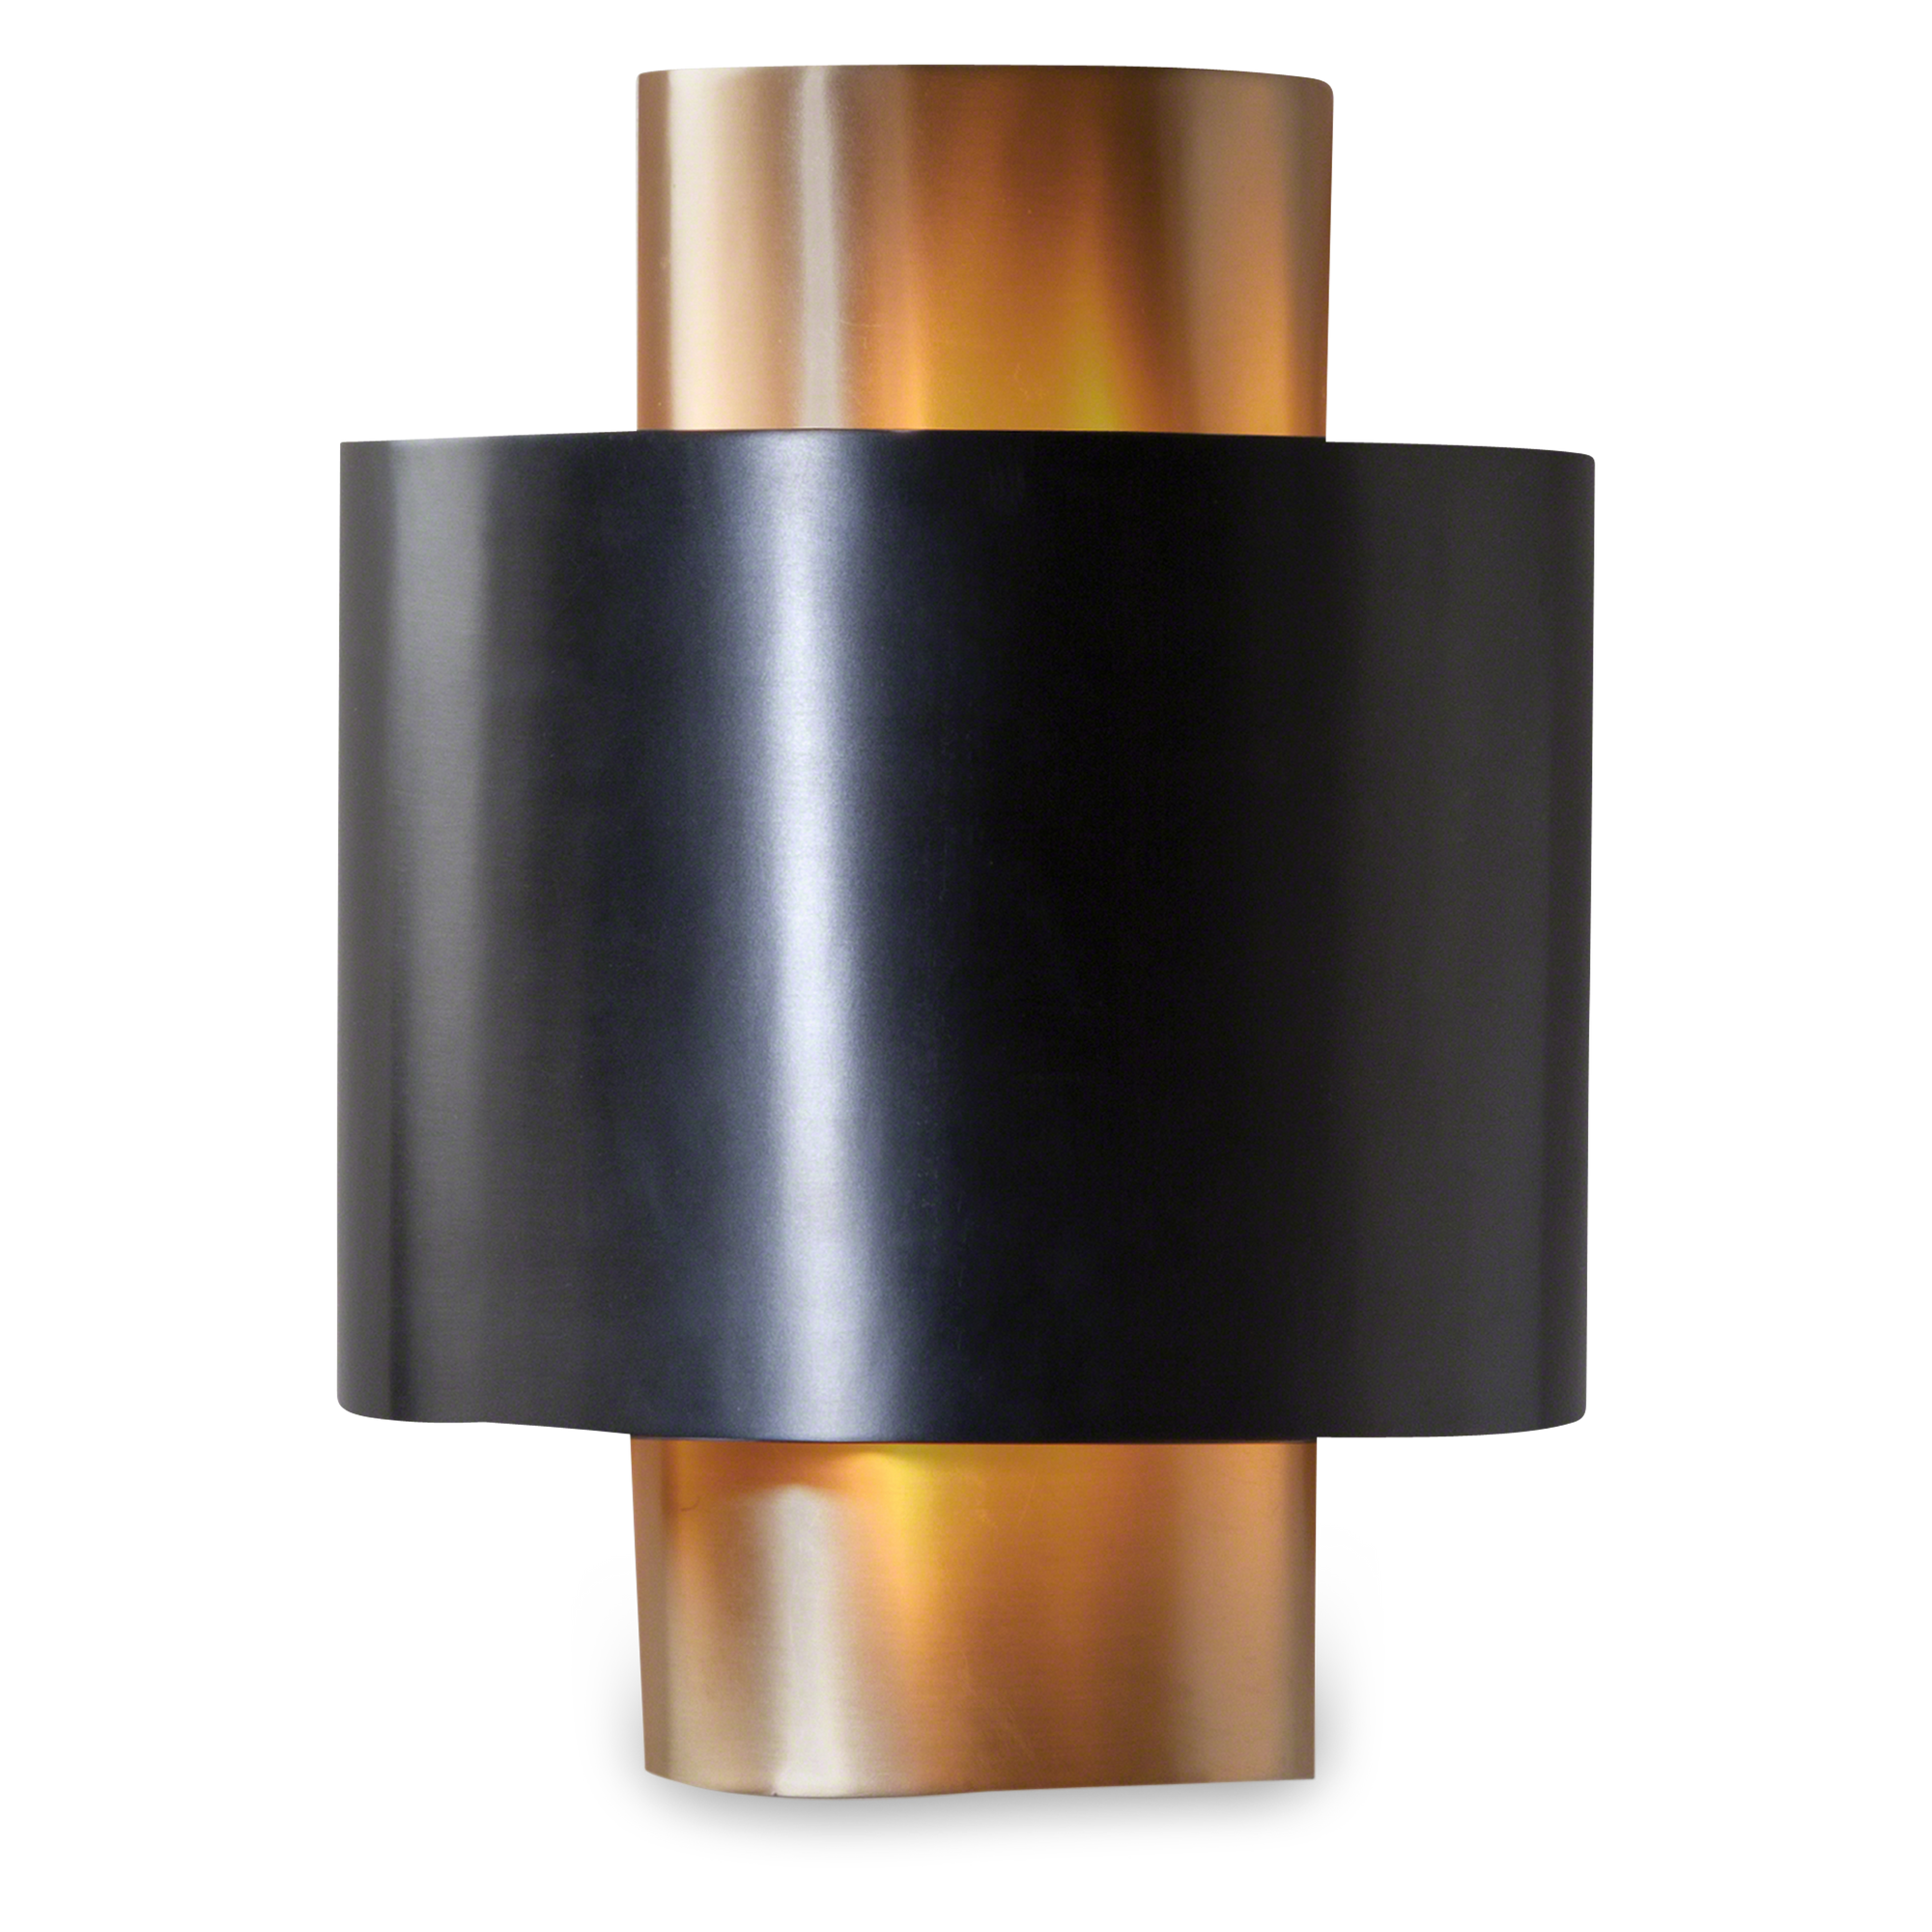 Sophisticated wall sconce featuring a gold column and overlapping black metal shade.